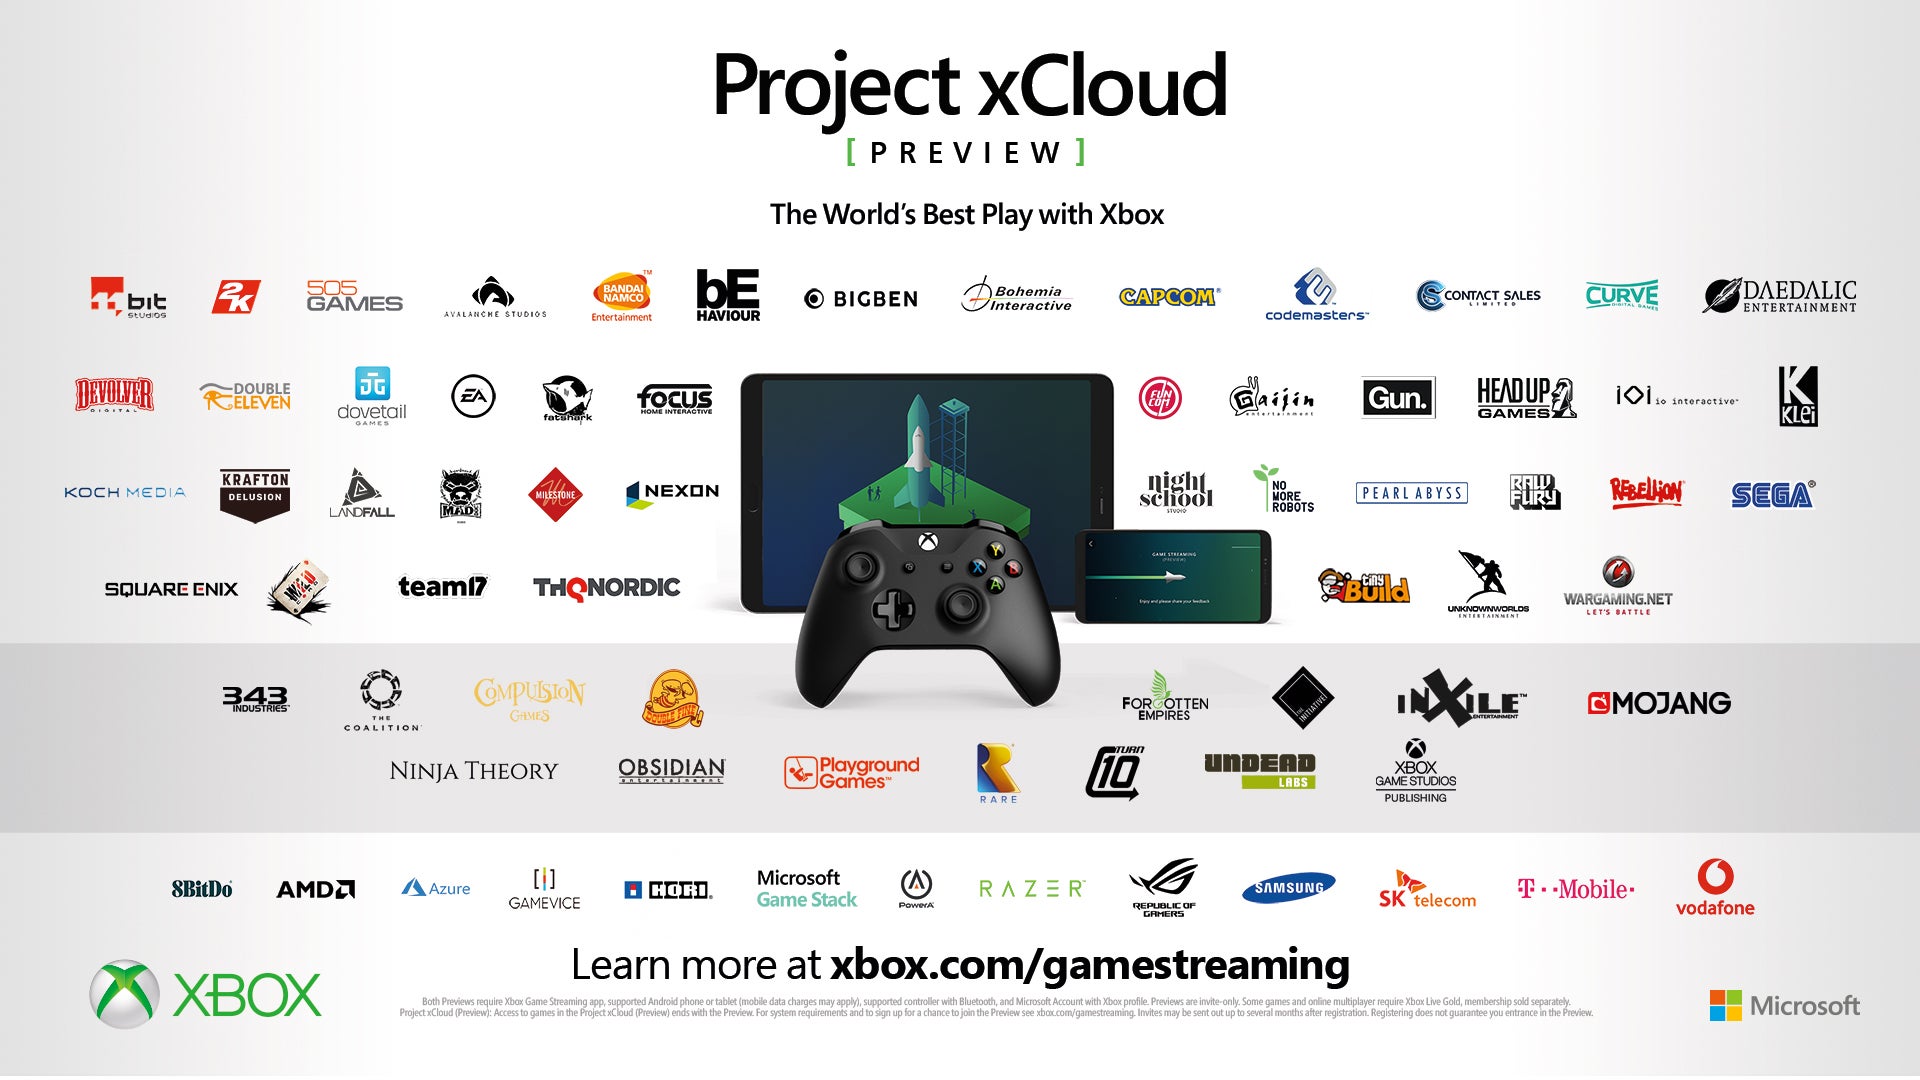 Image for Project xCloud Preview: 50 new games added, coming to PC in 2020, will support DualShock controller